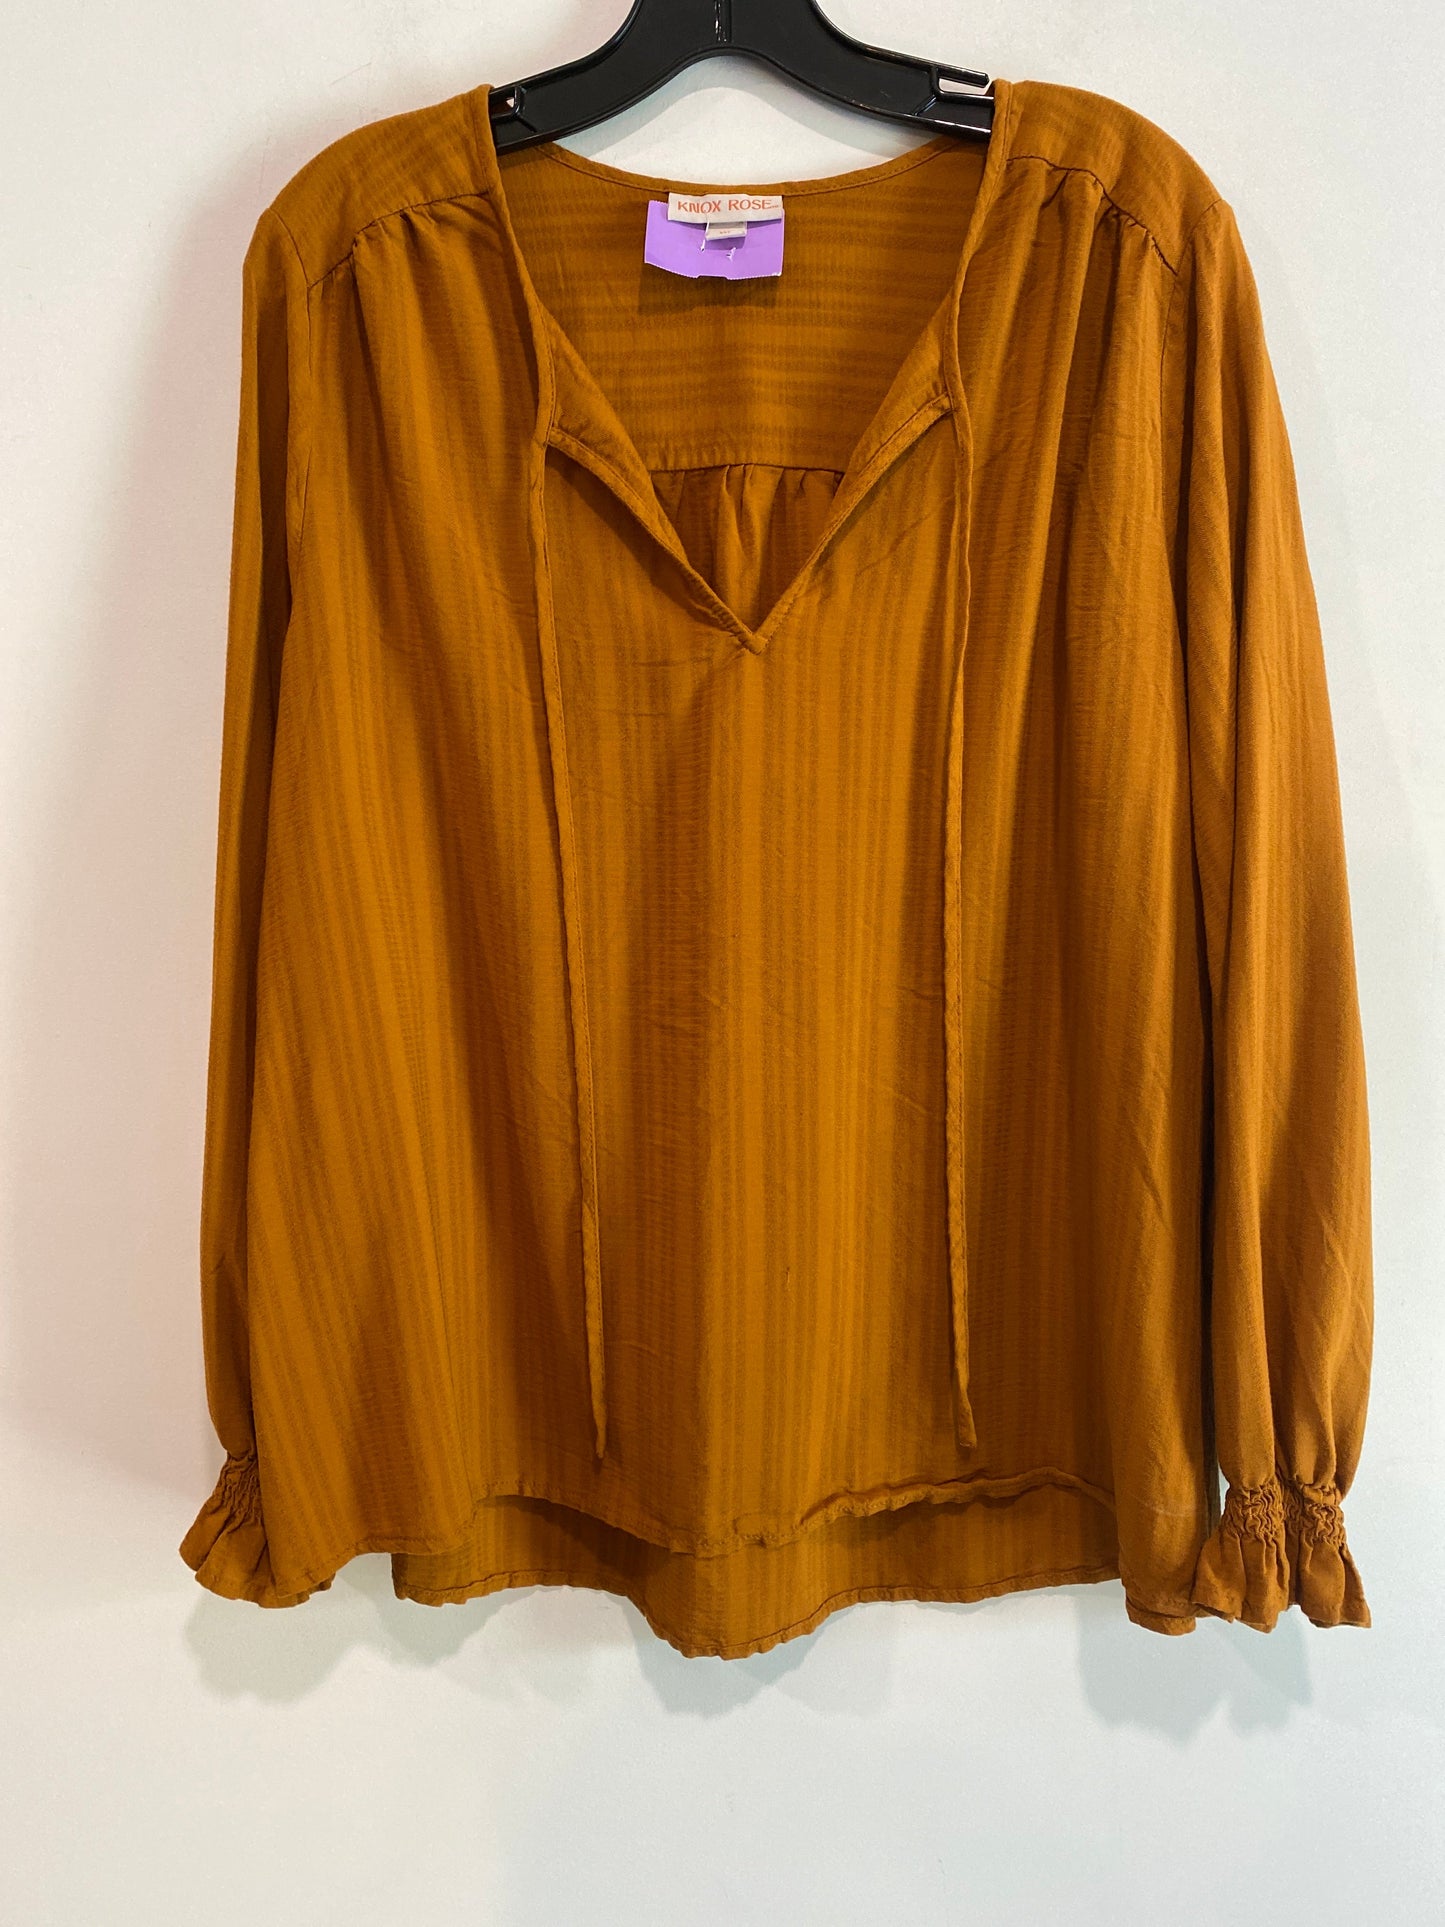 Brown Top Long Sleeve Knox Rose, Size Xxl